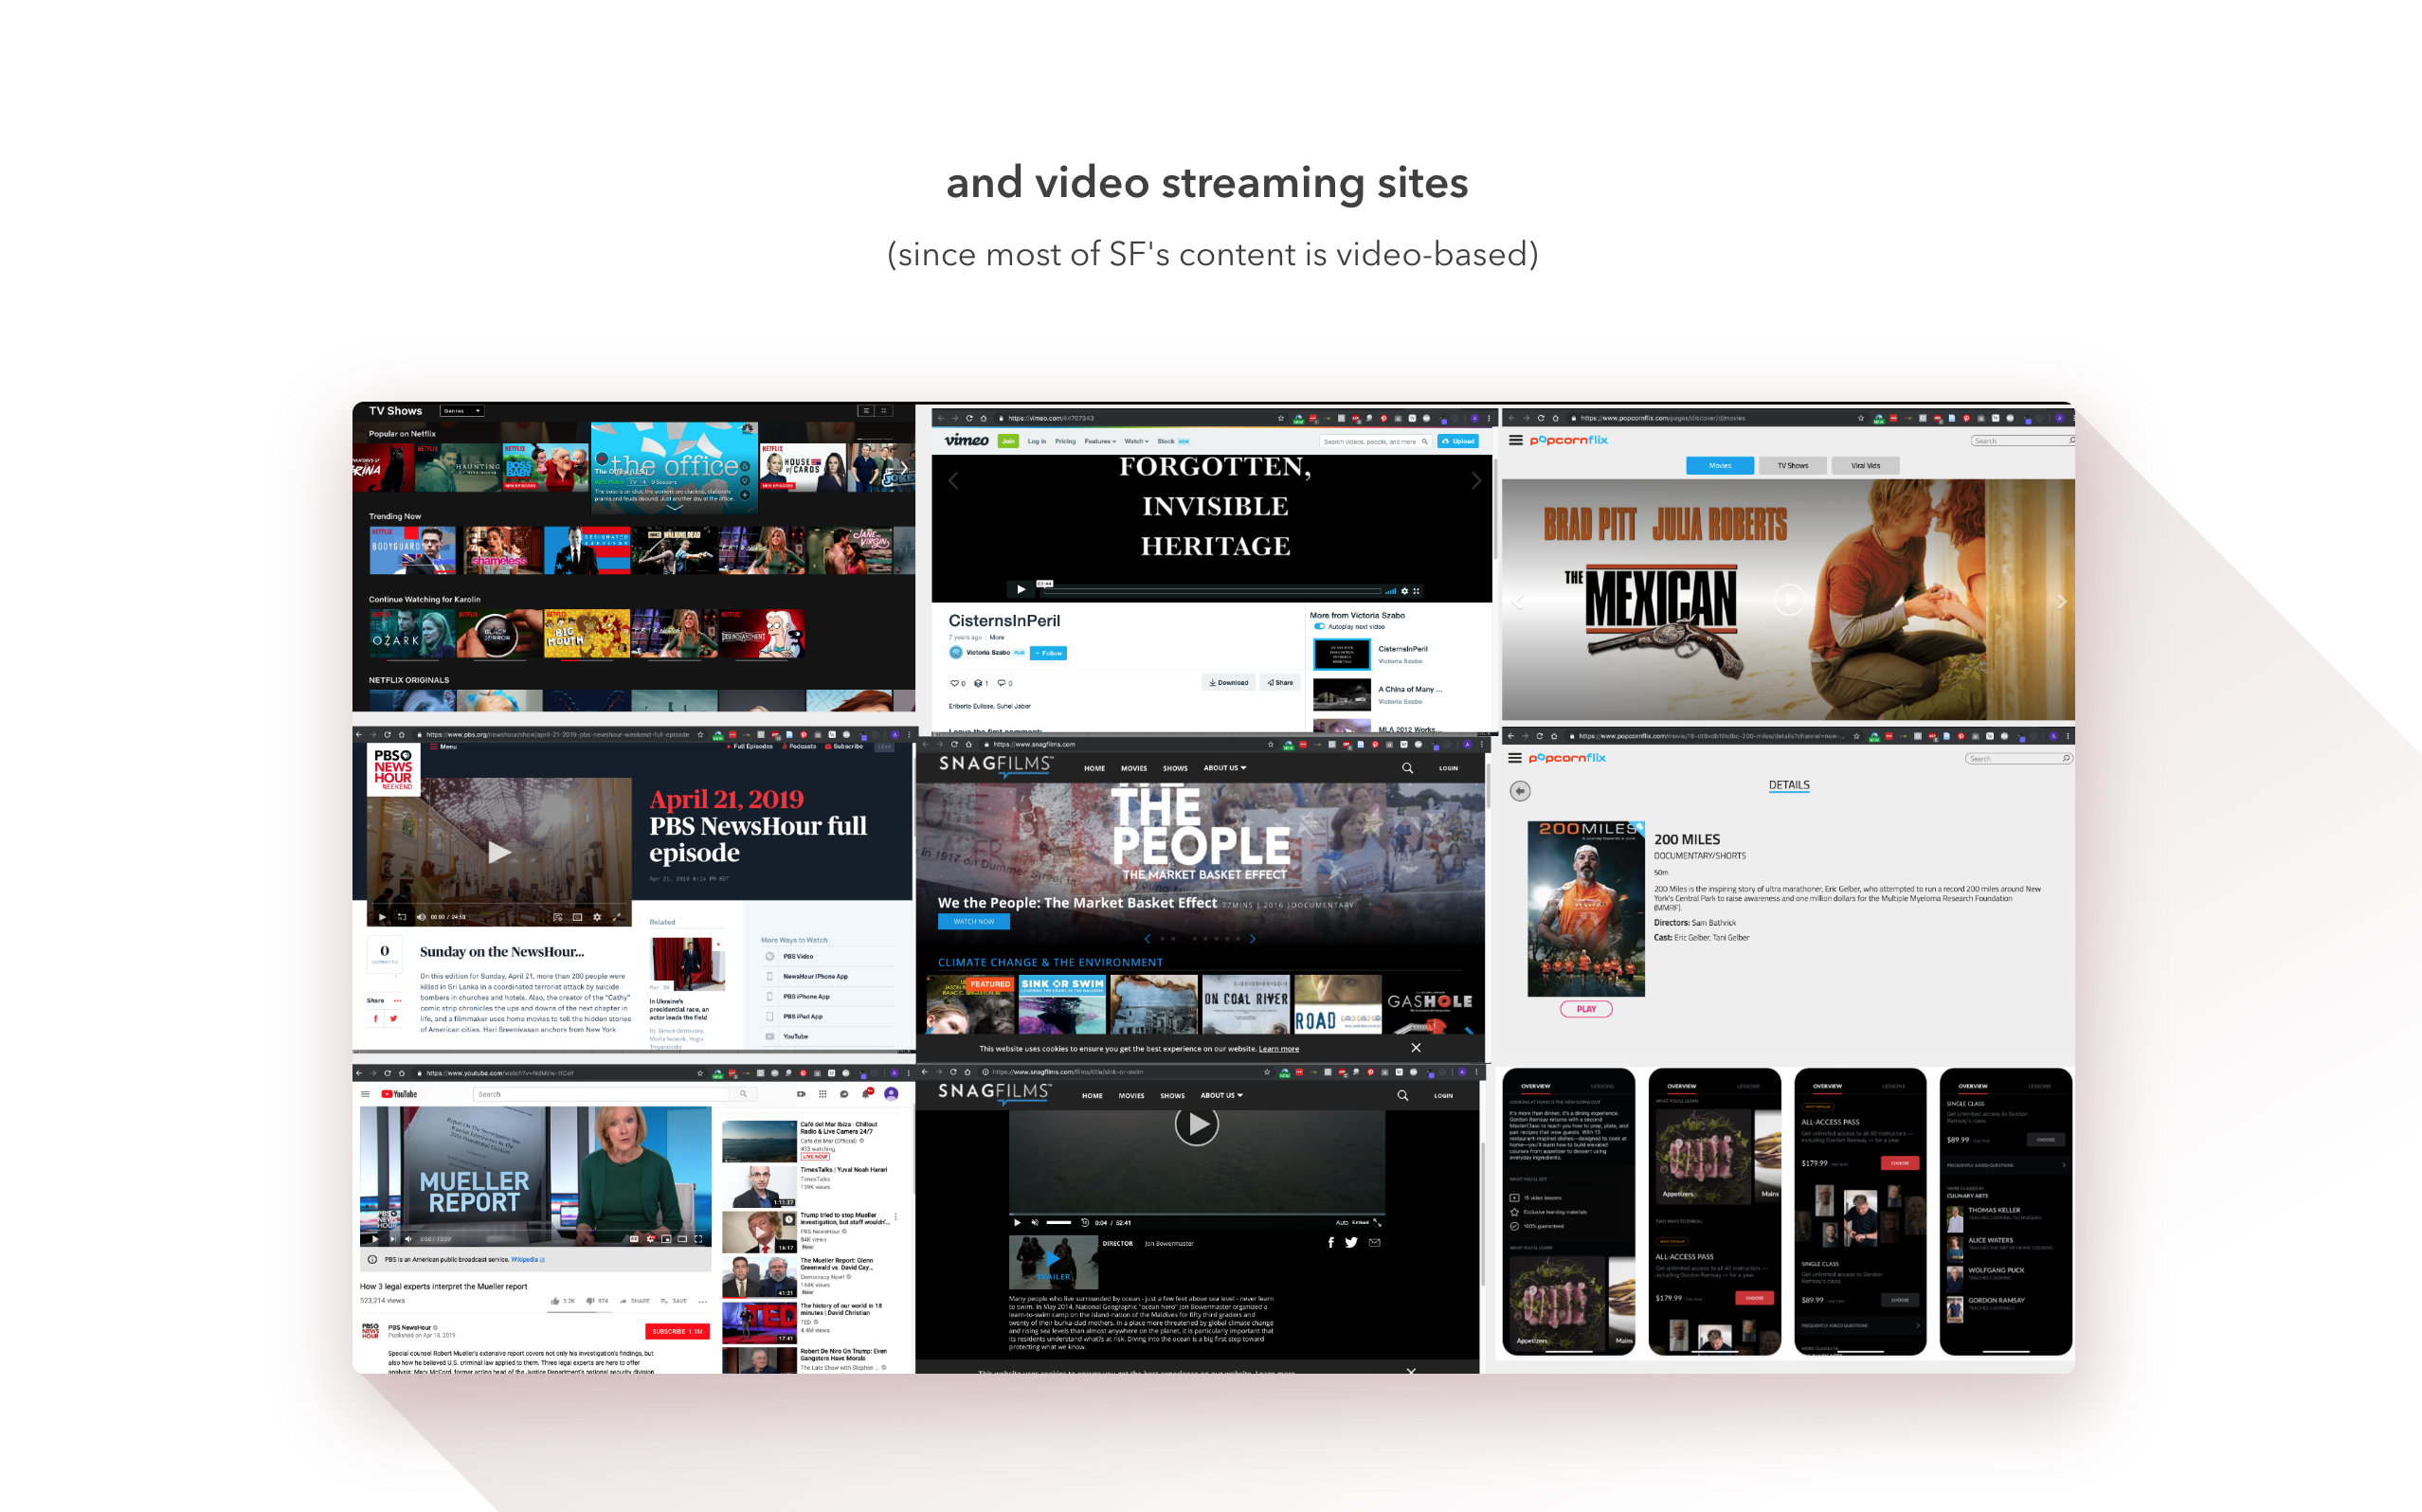 drawing inspiration from comparative analysis of video streaming websites